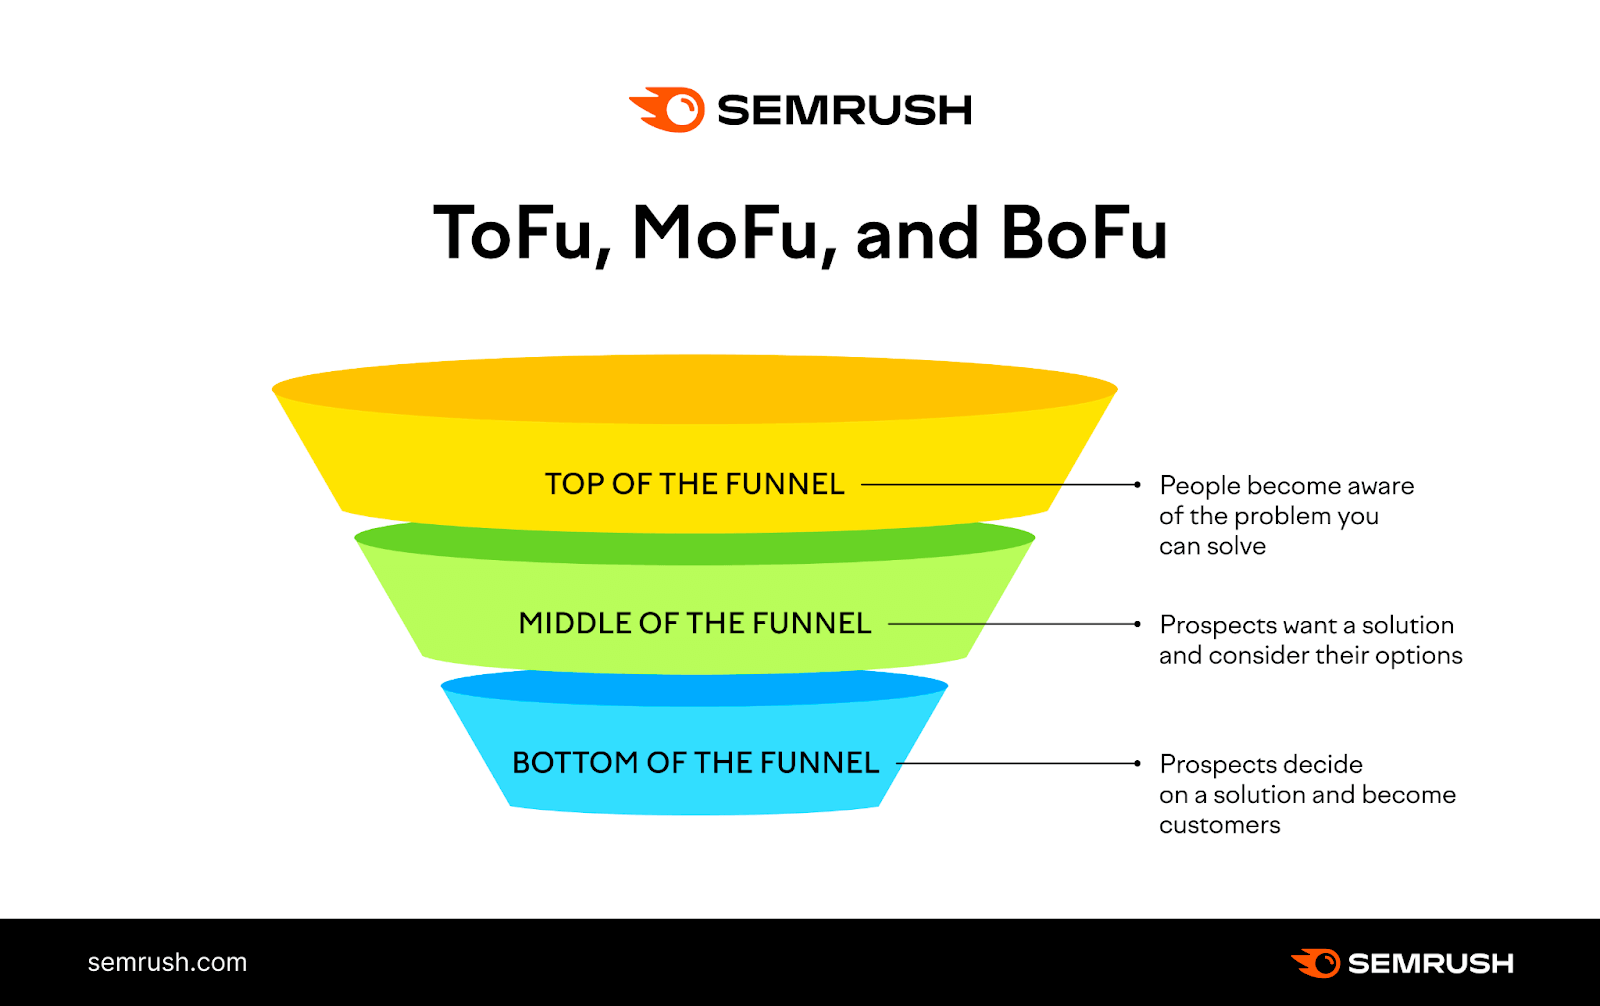 top of funnel is radical   becoming alert  of the occupation   you solve, mediate  of funnel is the imaginable    wanting a solution   and considering their options, bottommost  of funnel is imaginable    deciding a solution